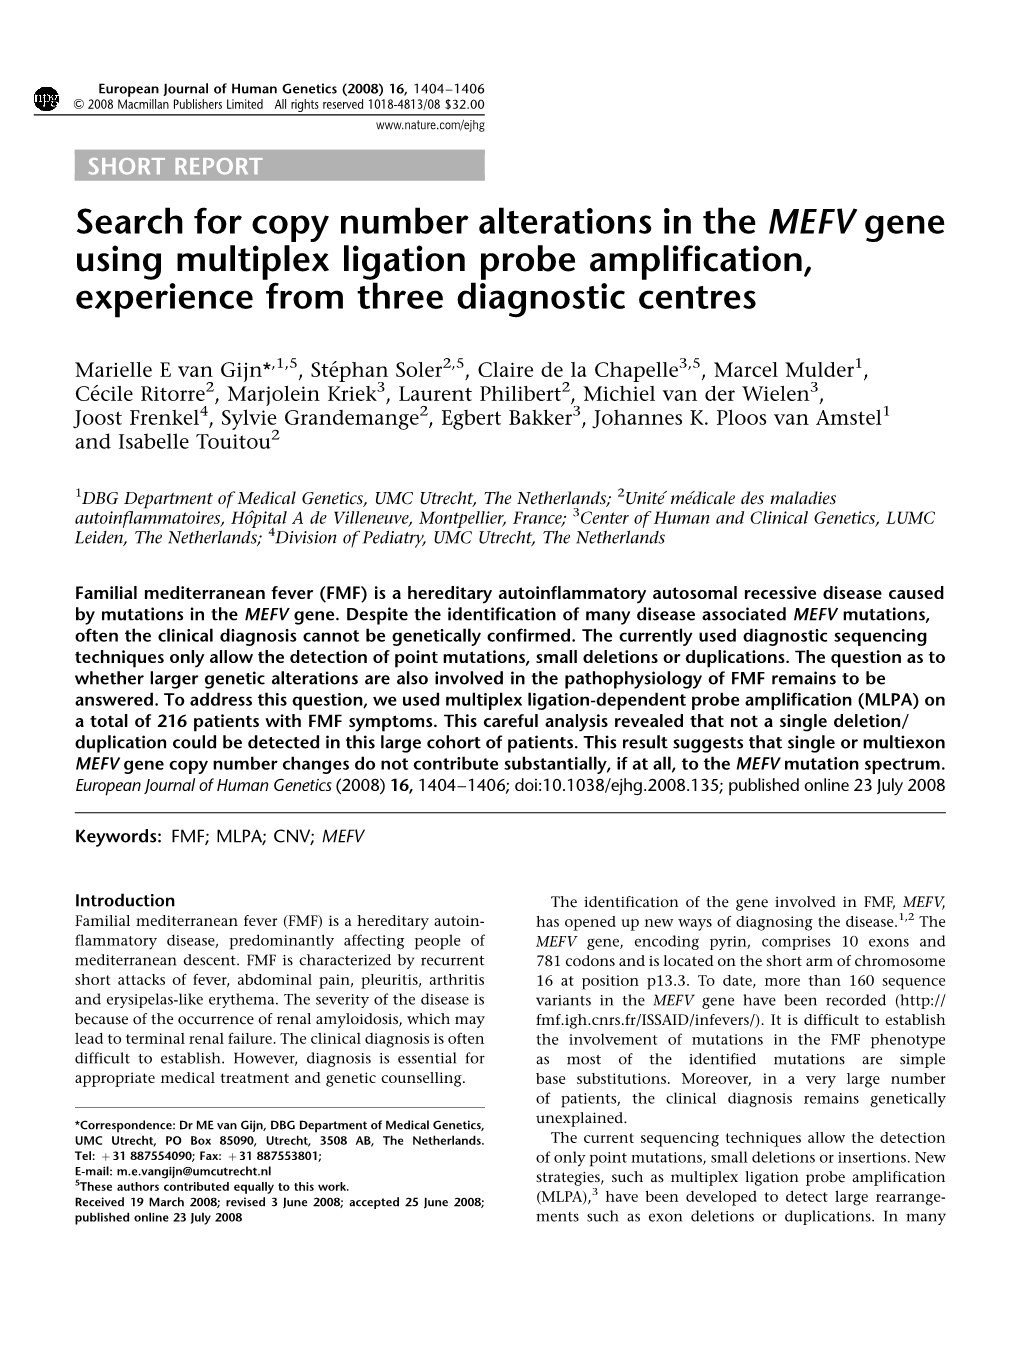 Search for Copy Number Alterations in the MEFV Gene Using Multiplex Ligation Probe Amplification, Experience from Three Diagnostic Centres